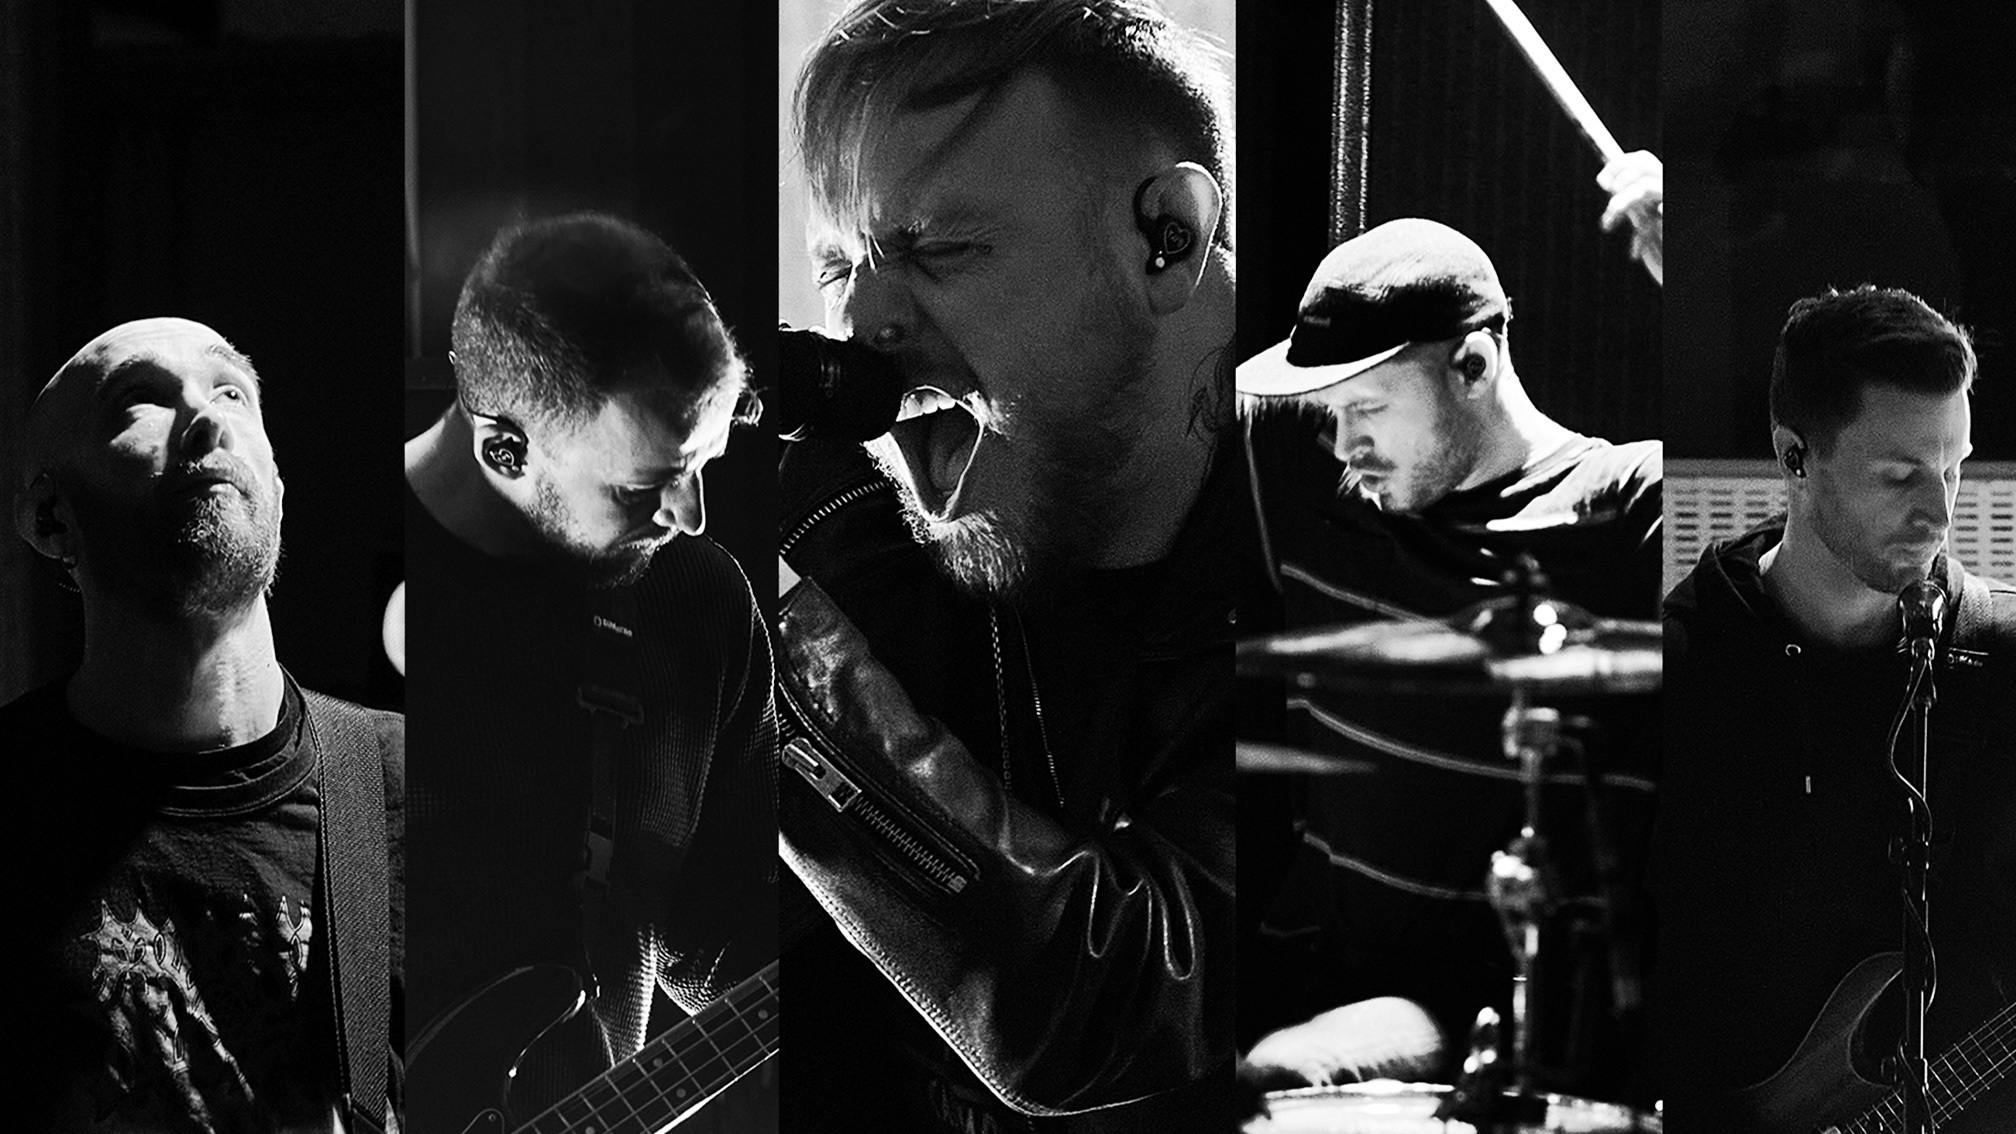 Watch Architects perform Animals with an orchestra at Abbey Road Studios